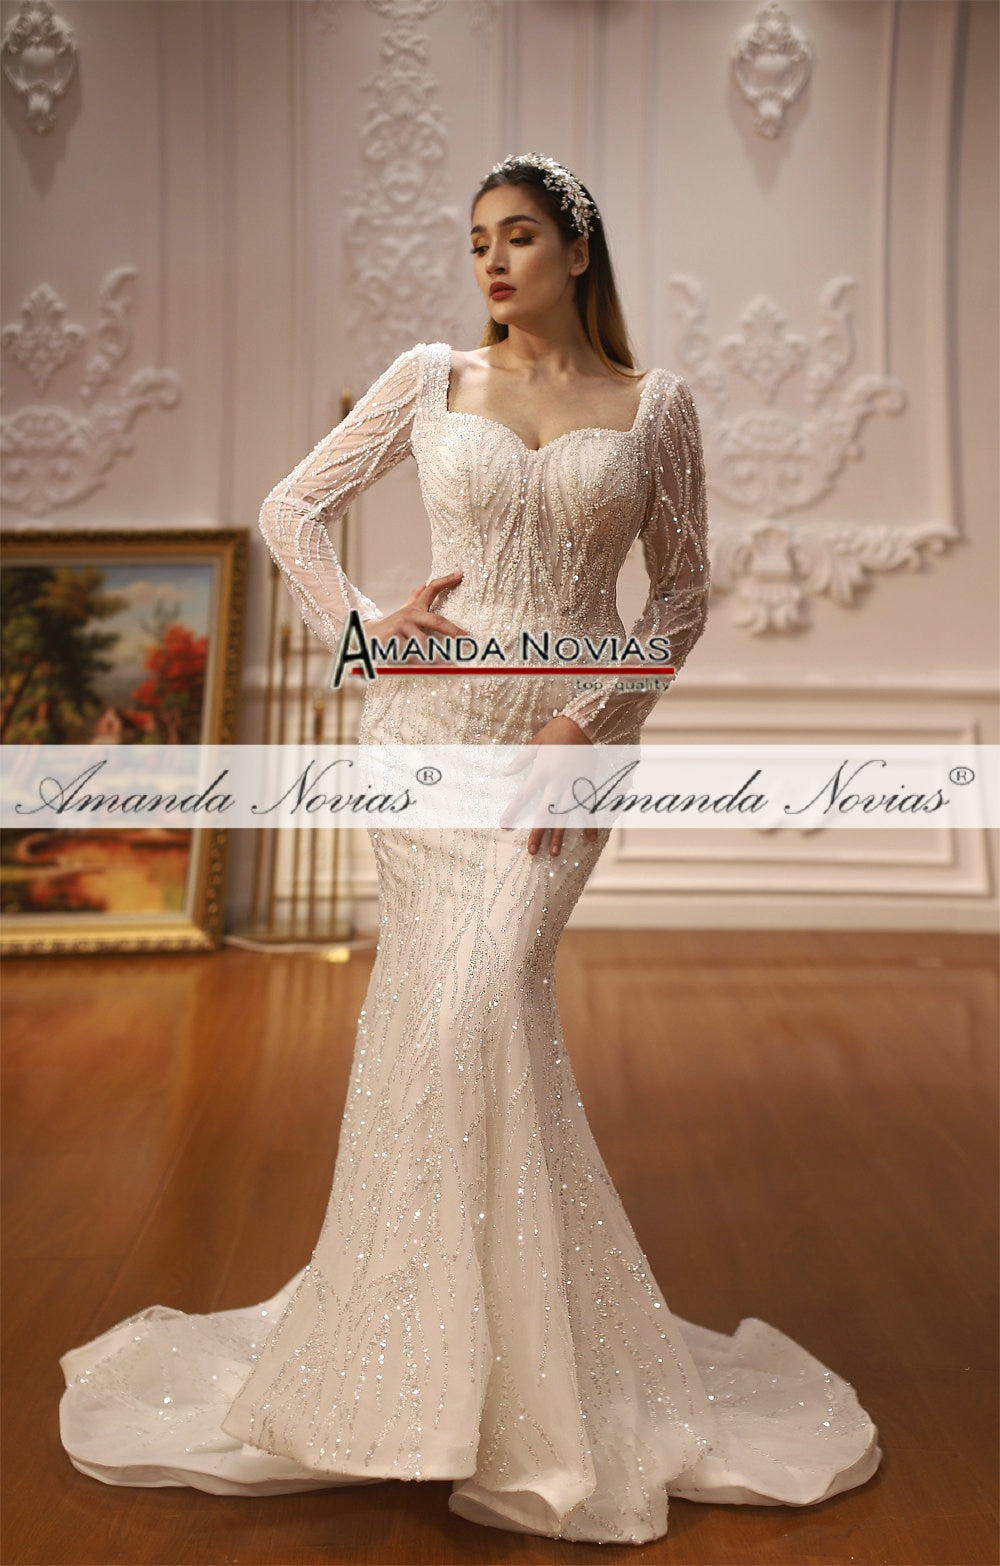 Two In One Luxury Mermaid Wedding Gown Dress The Clothing Company Sydney